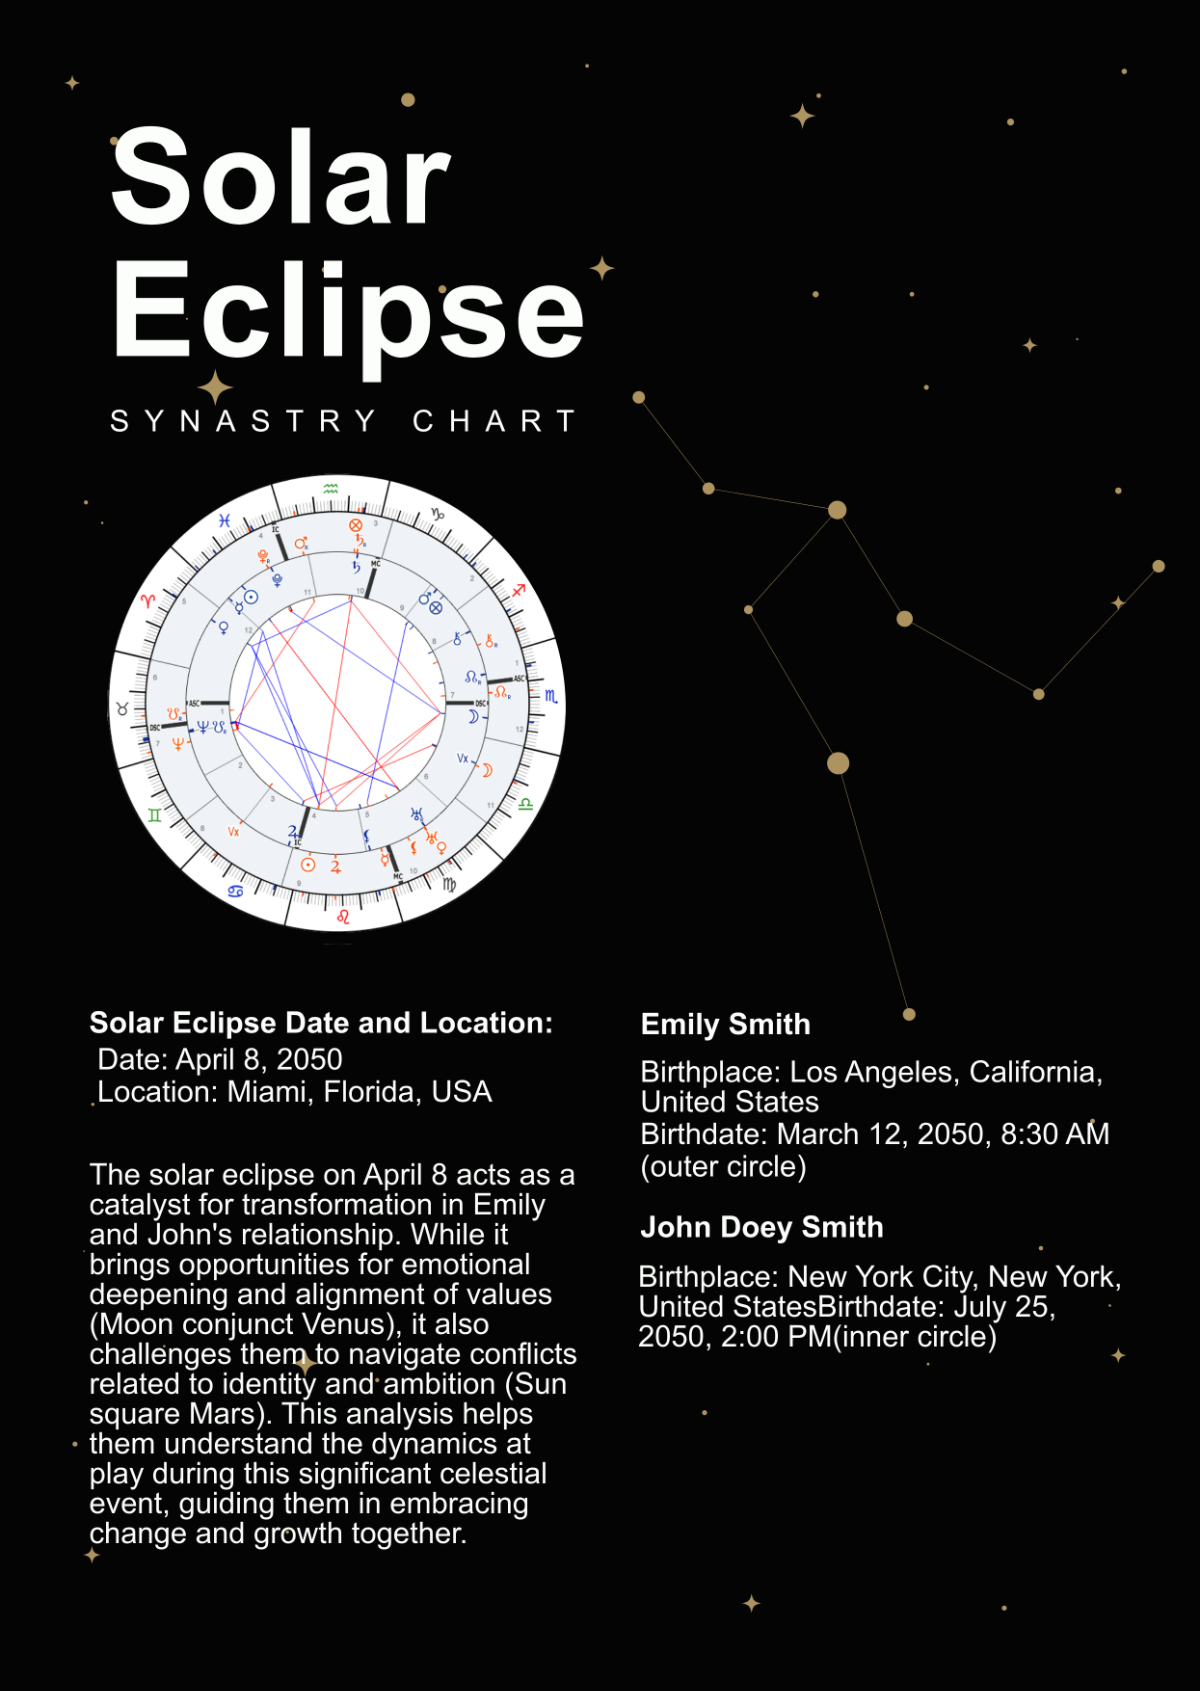 Solar Eclipse Synastry Chart